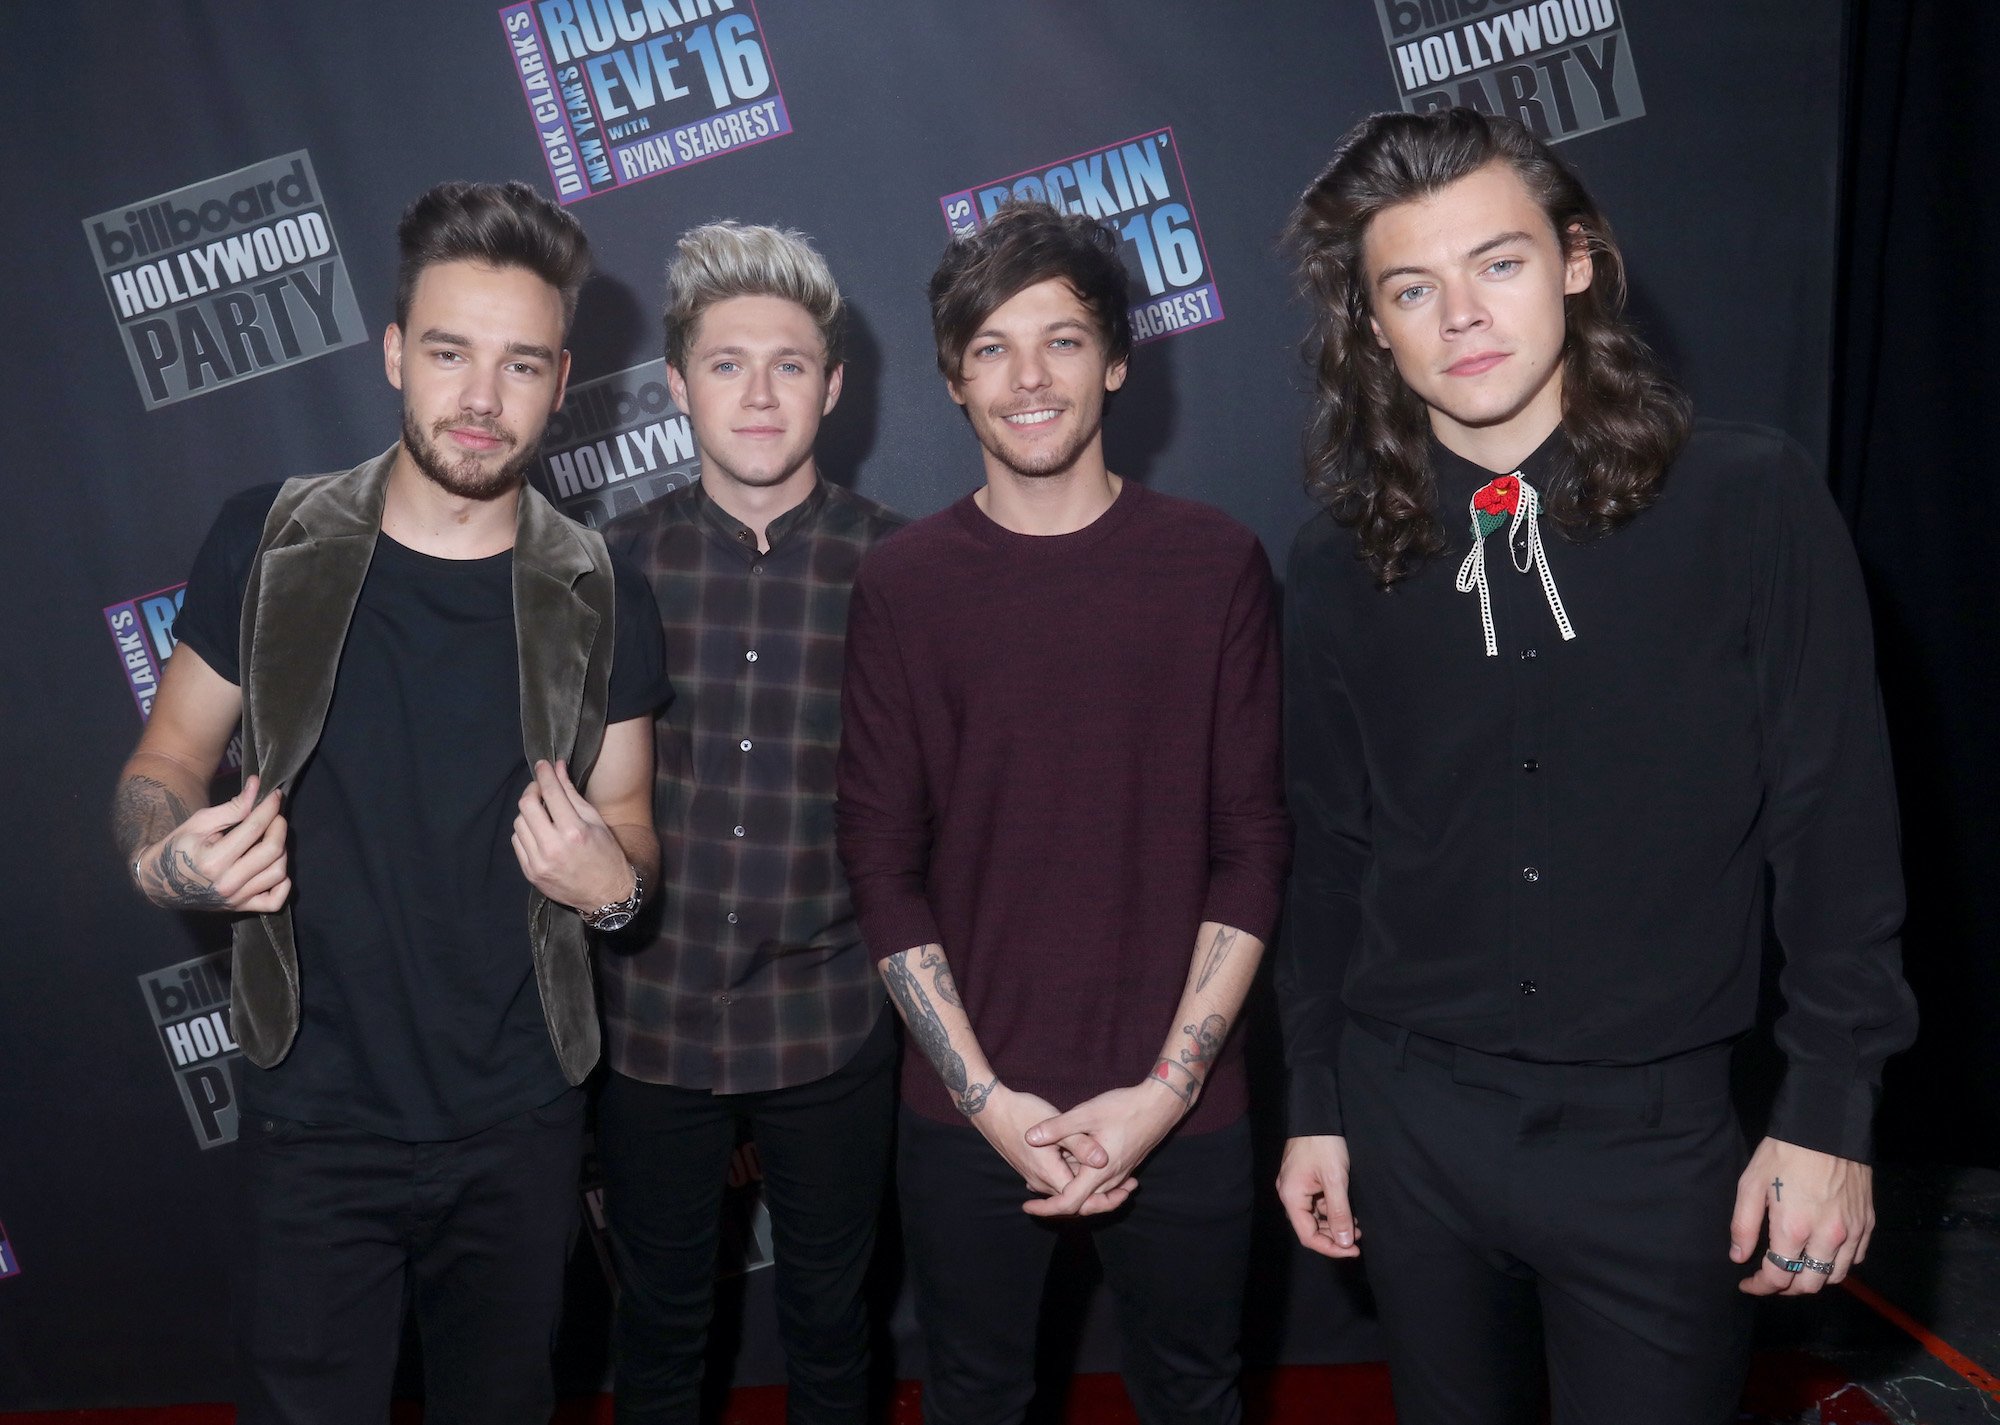 One Direction posing together ahead of possible reunion after hiatus